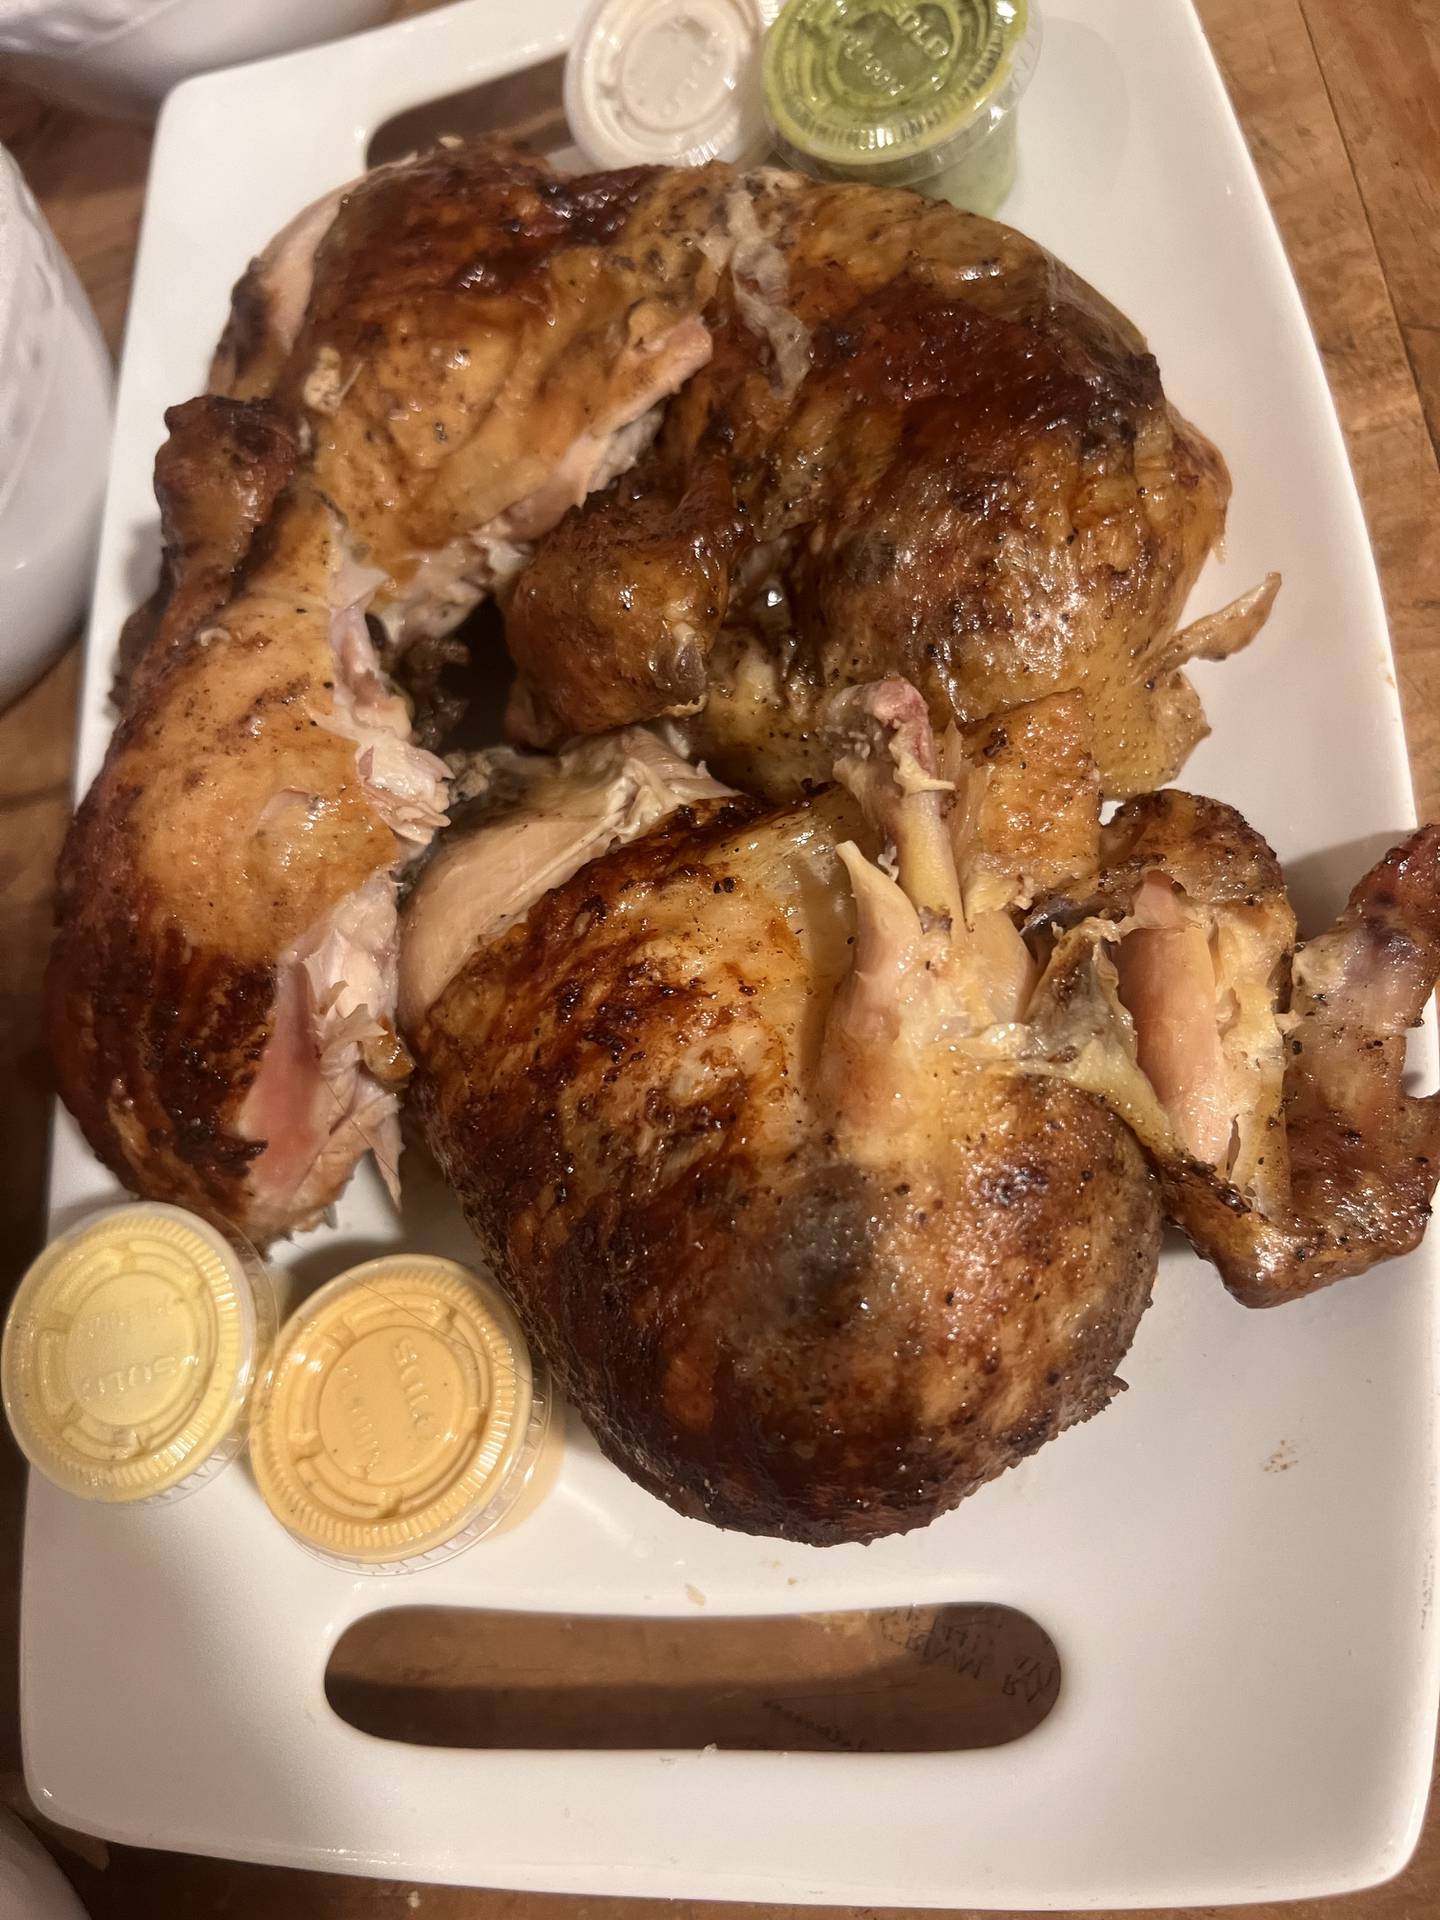 The charcoal rotisserie whole chicken is the specialty at Spinz Pollo a la Brasa